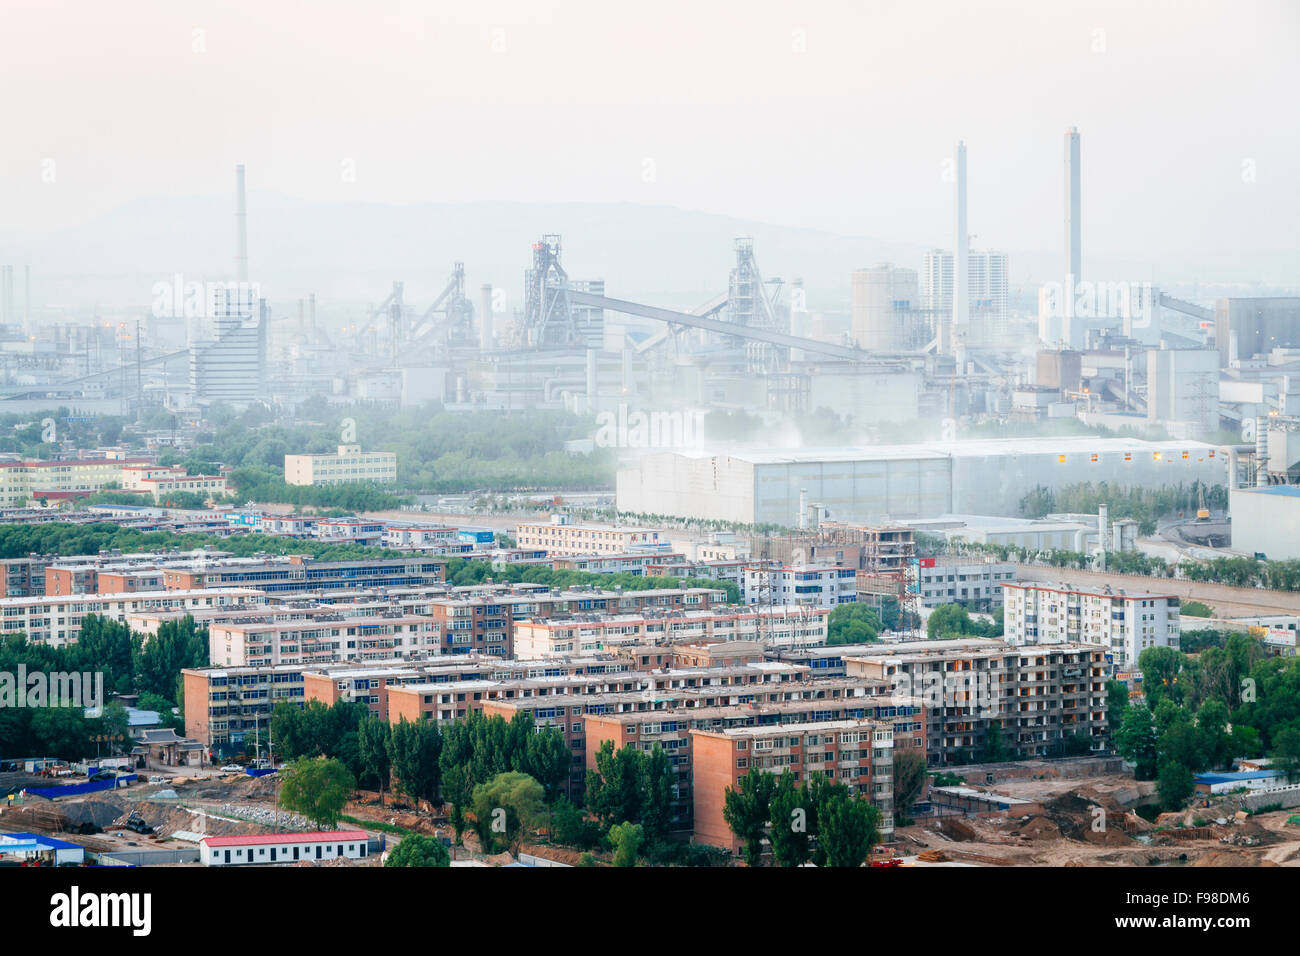 Taiyuan, Shanxi province, China - The view of Taiyuan city in the daytime. Stock Photo